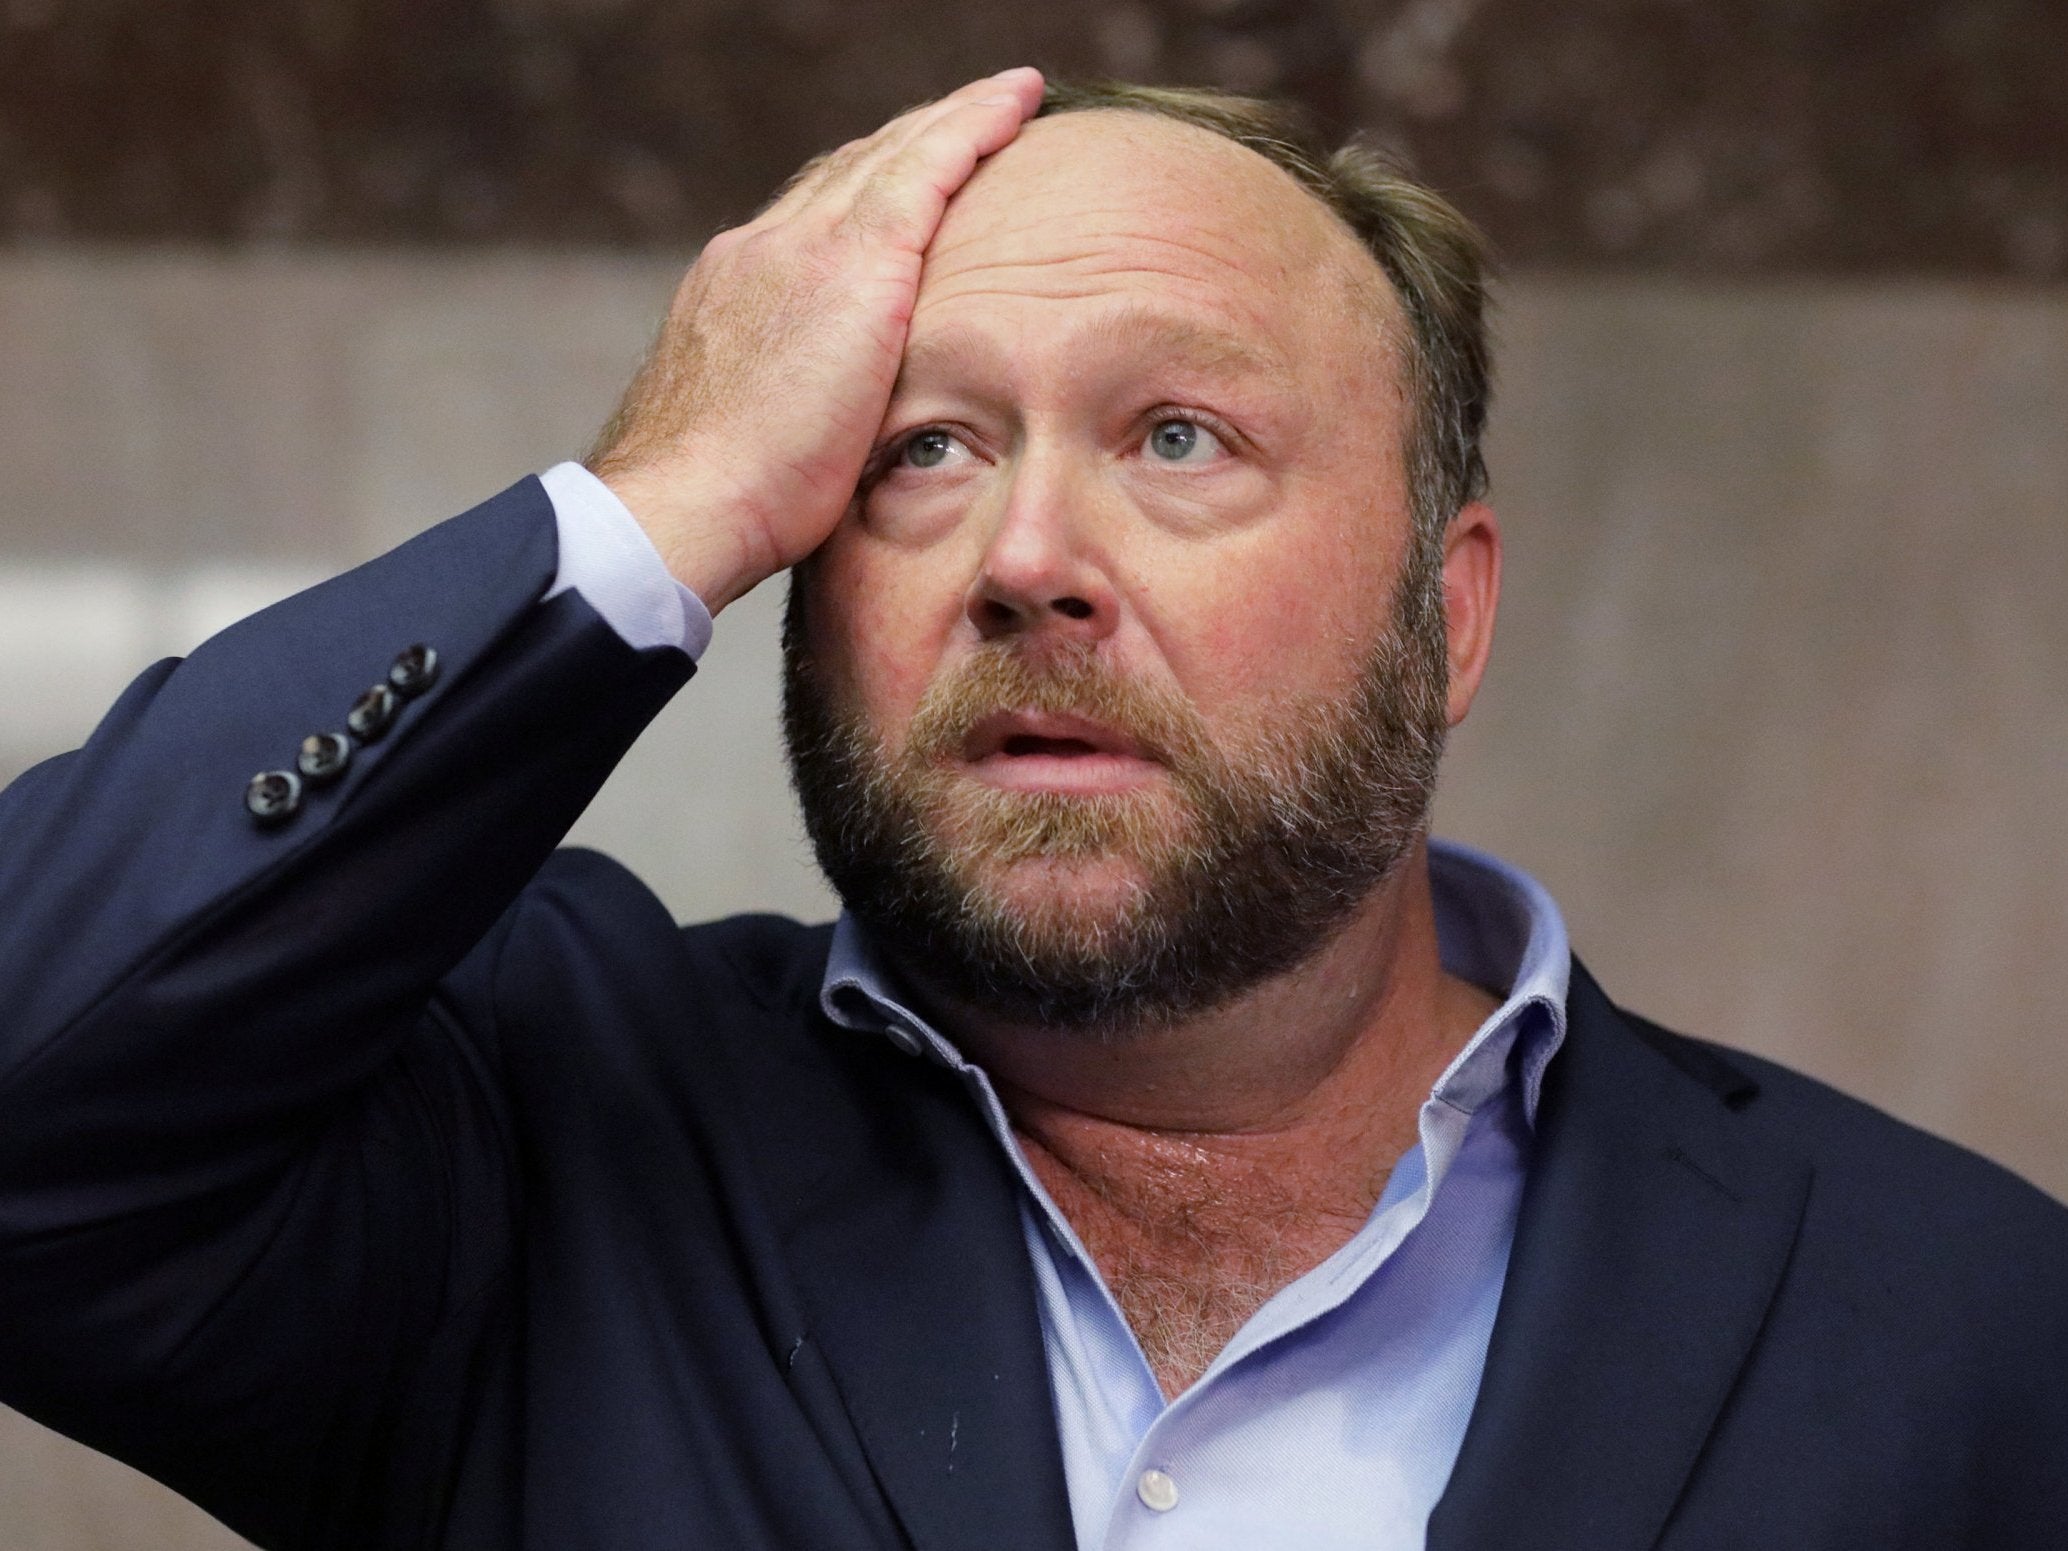 Infowars host Alex Jones addresses his thoughts on Sandy Hook shooting being a hoax